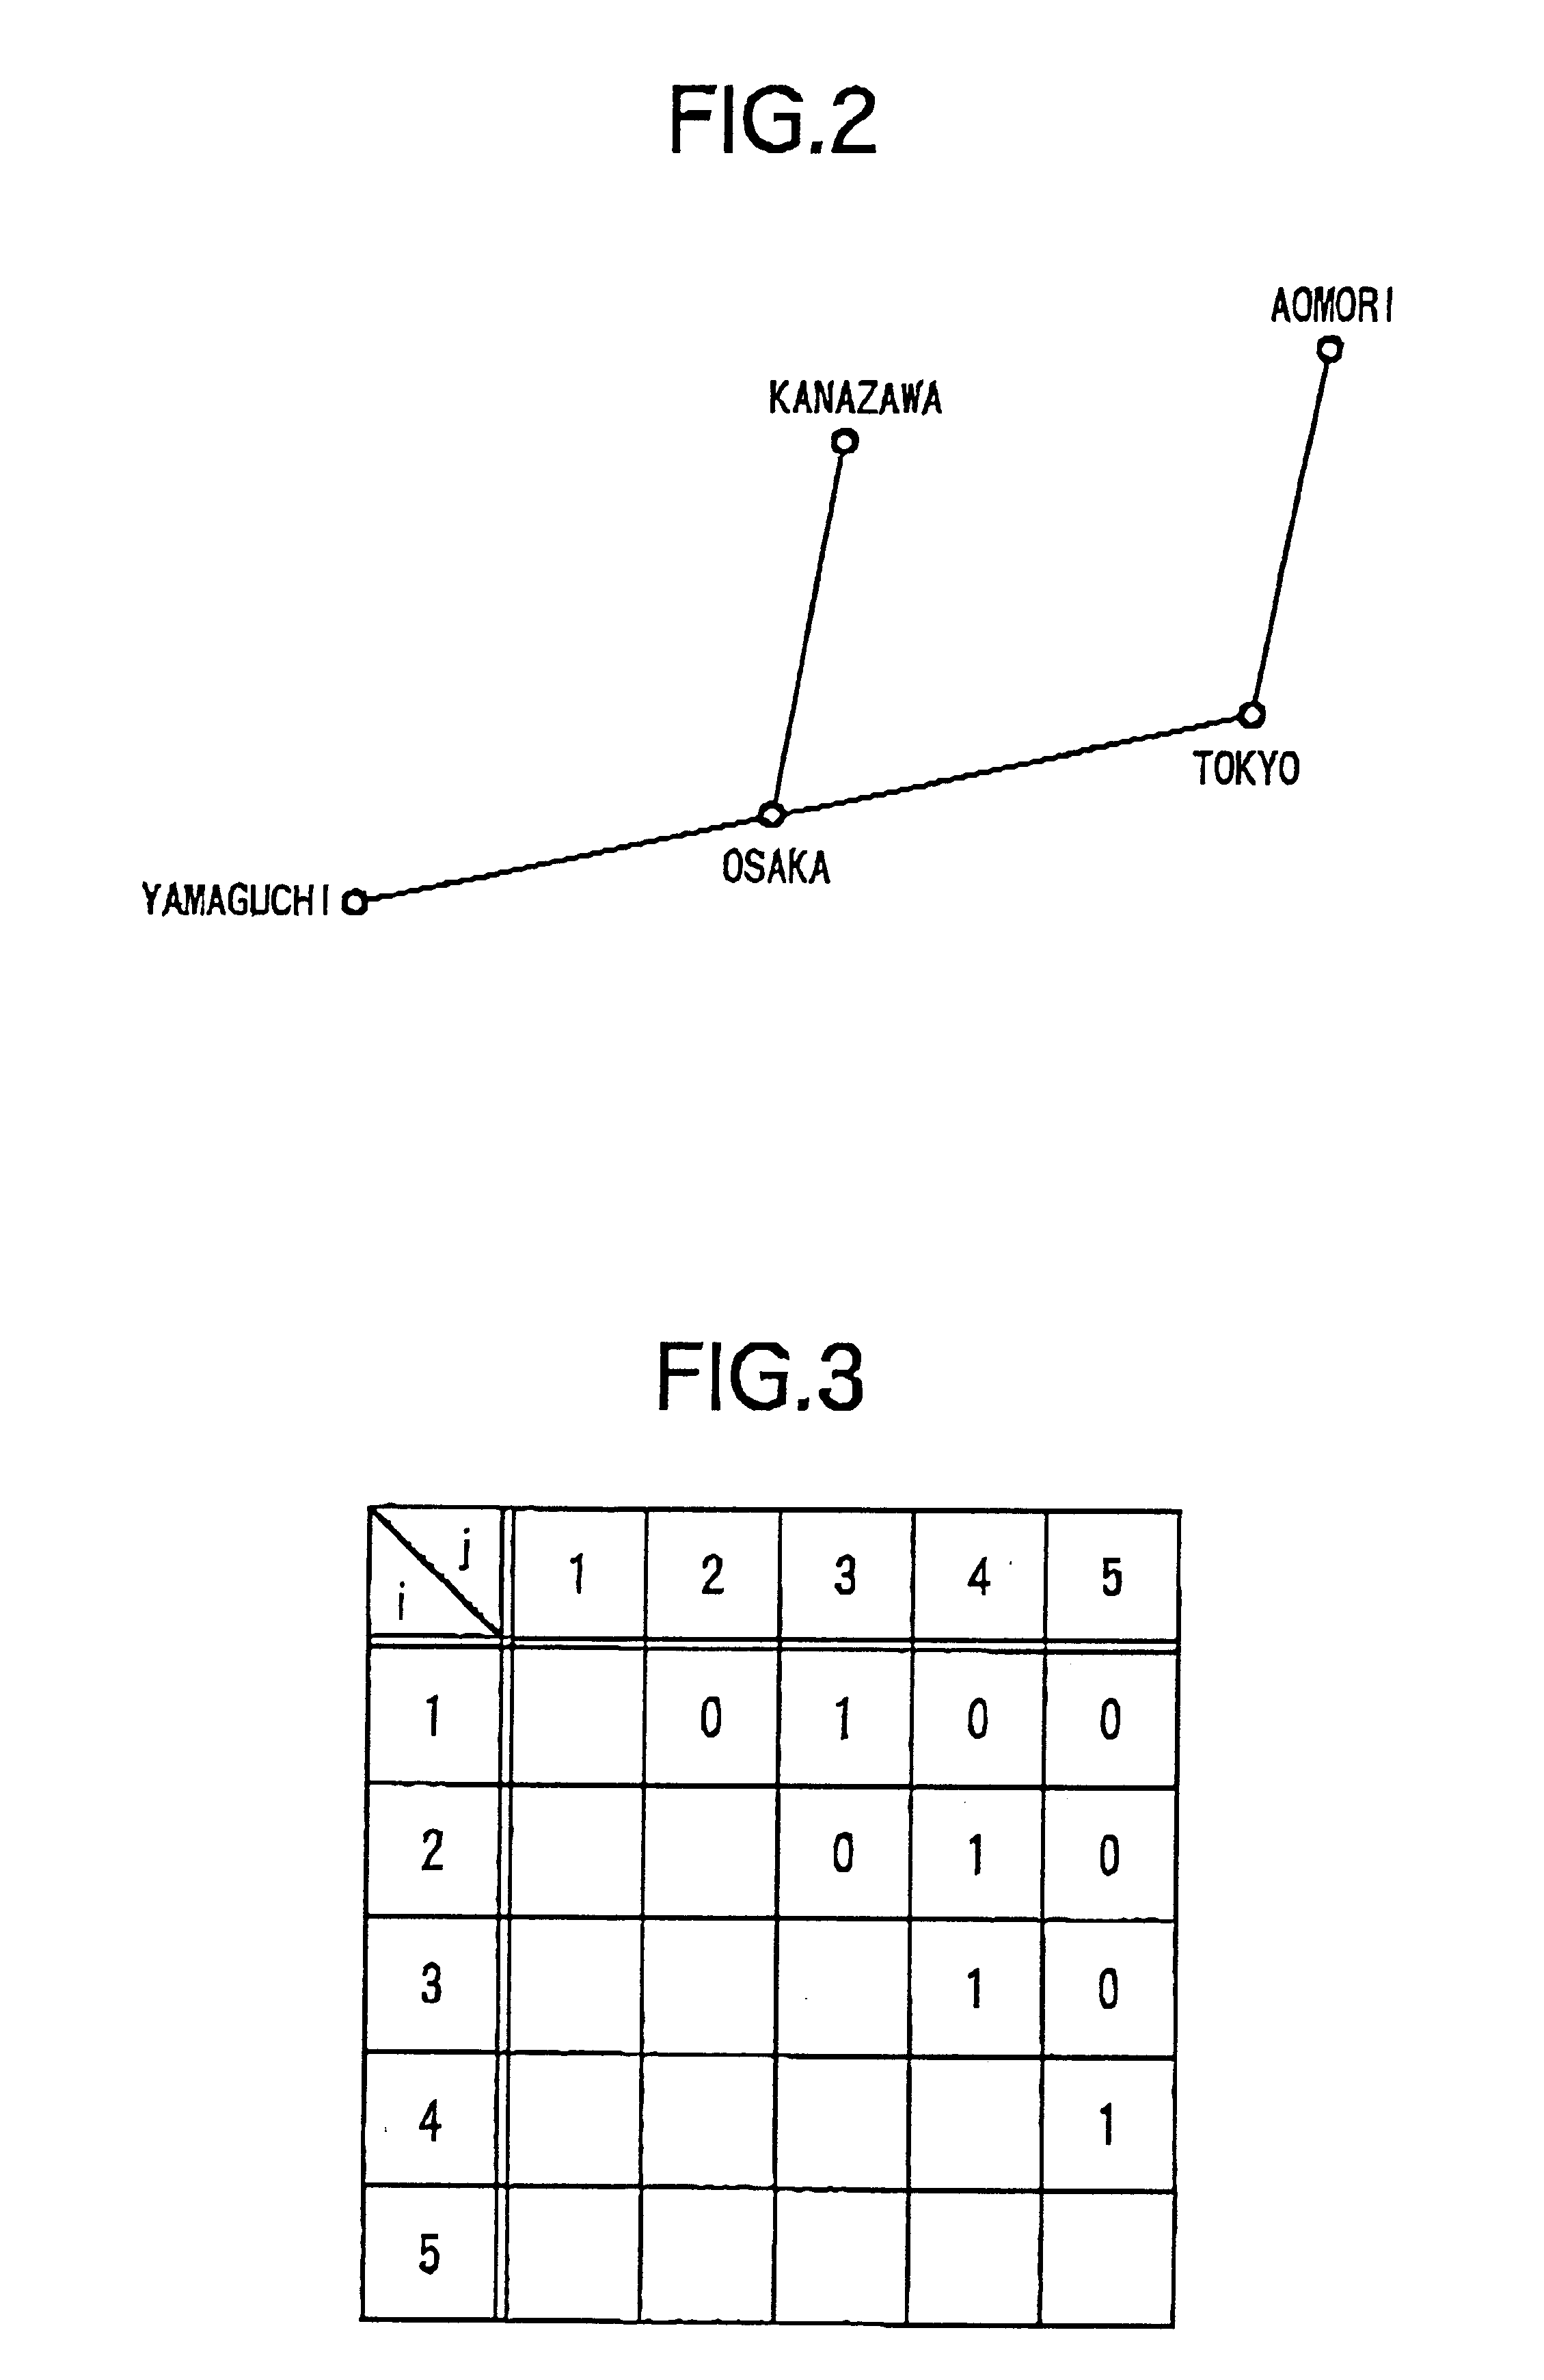 Network topology design apparatus and network topology design method, and recording medium recorded with a network topology design program